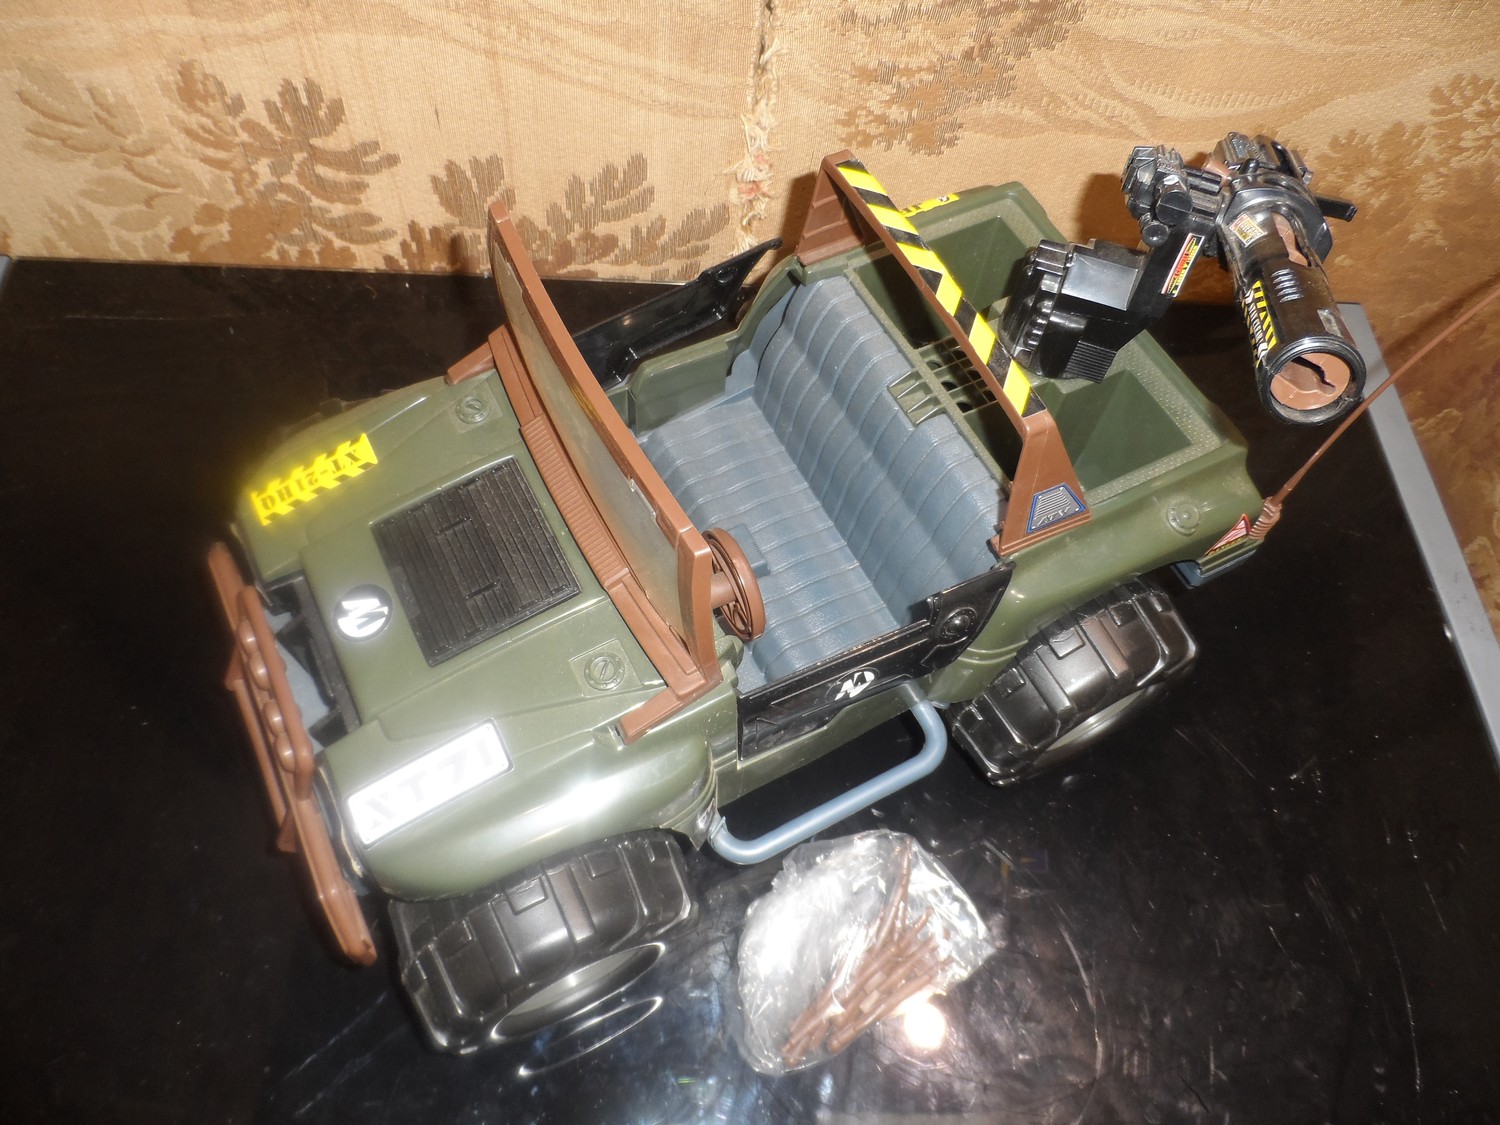 action man jeep 1990s